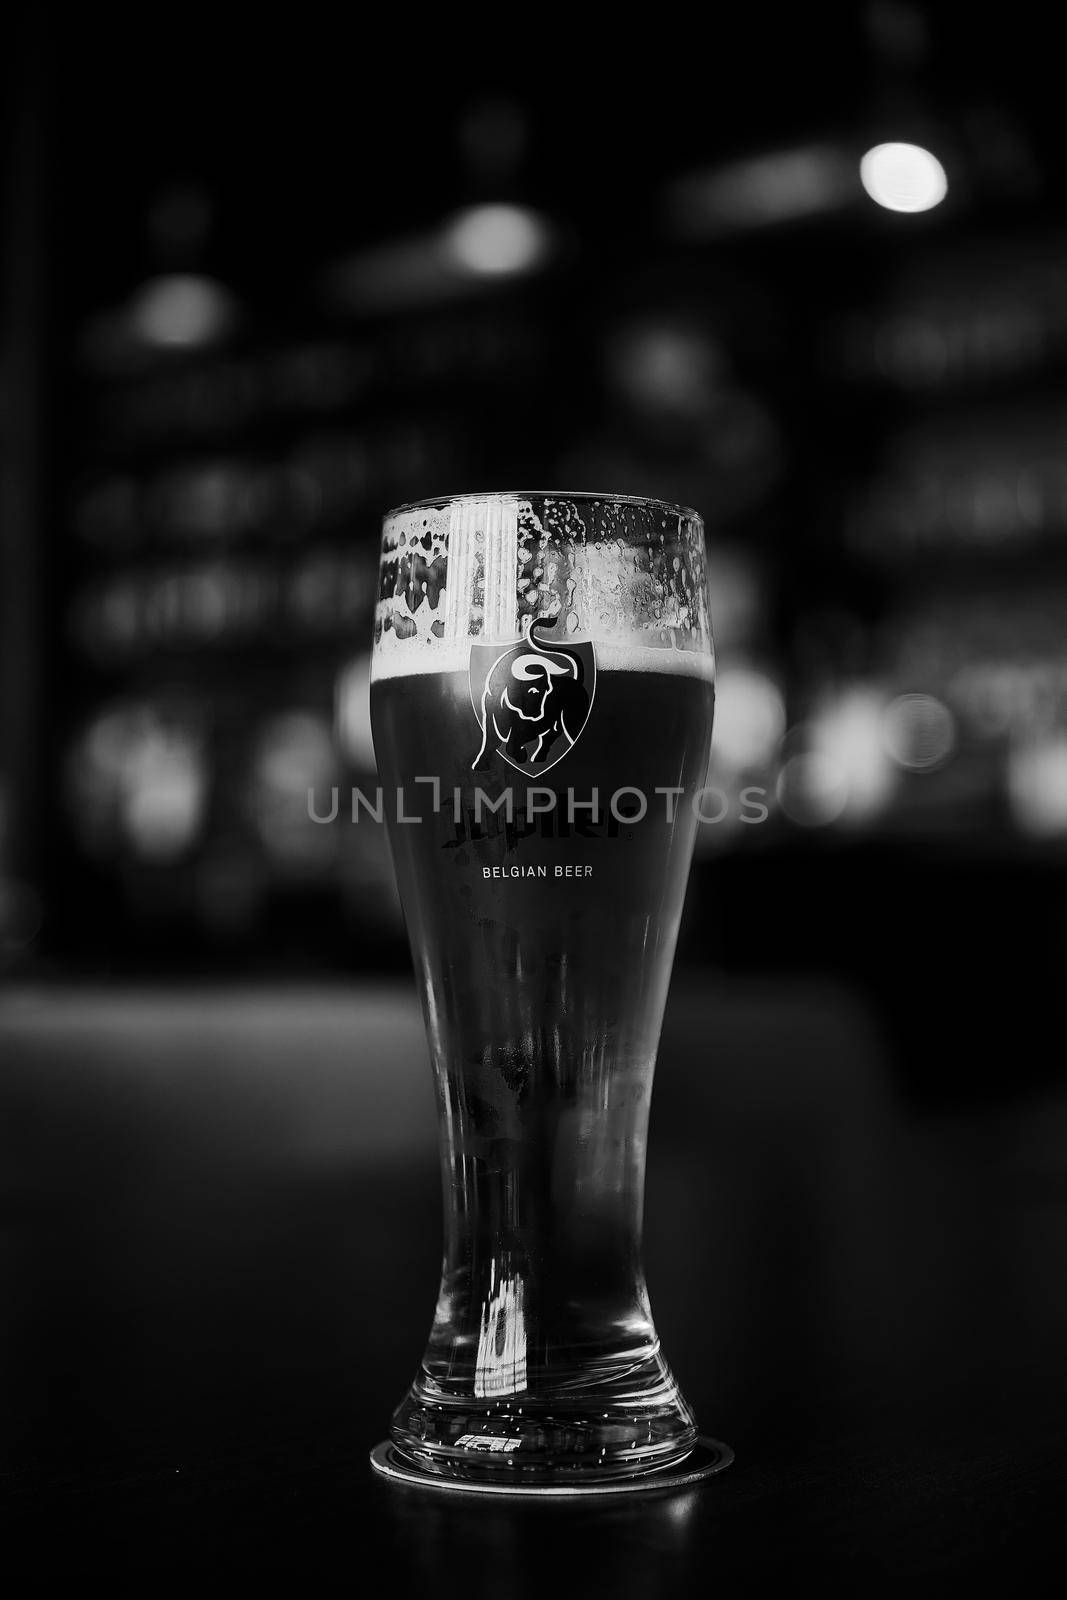 Glass of Belgian Jupiler beer. glass of beer on a table in a bar on blurred bokeh background. Saint Petersburg, Russia, 19,06,2021.